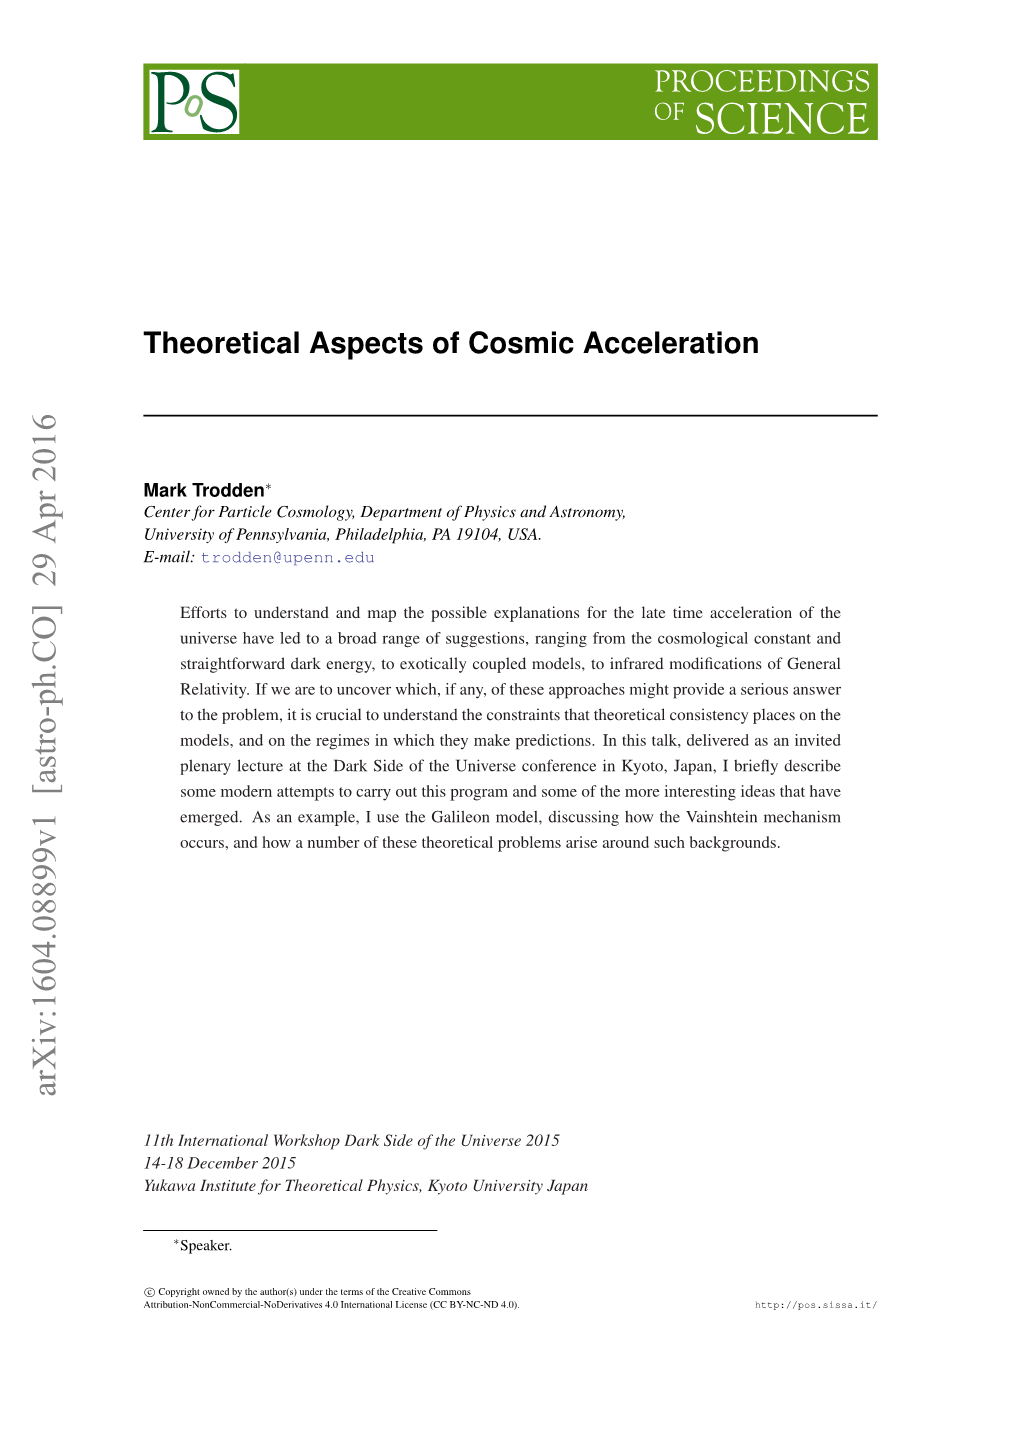 Theoretical Aspects of Cosmic Acceleration